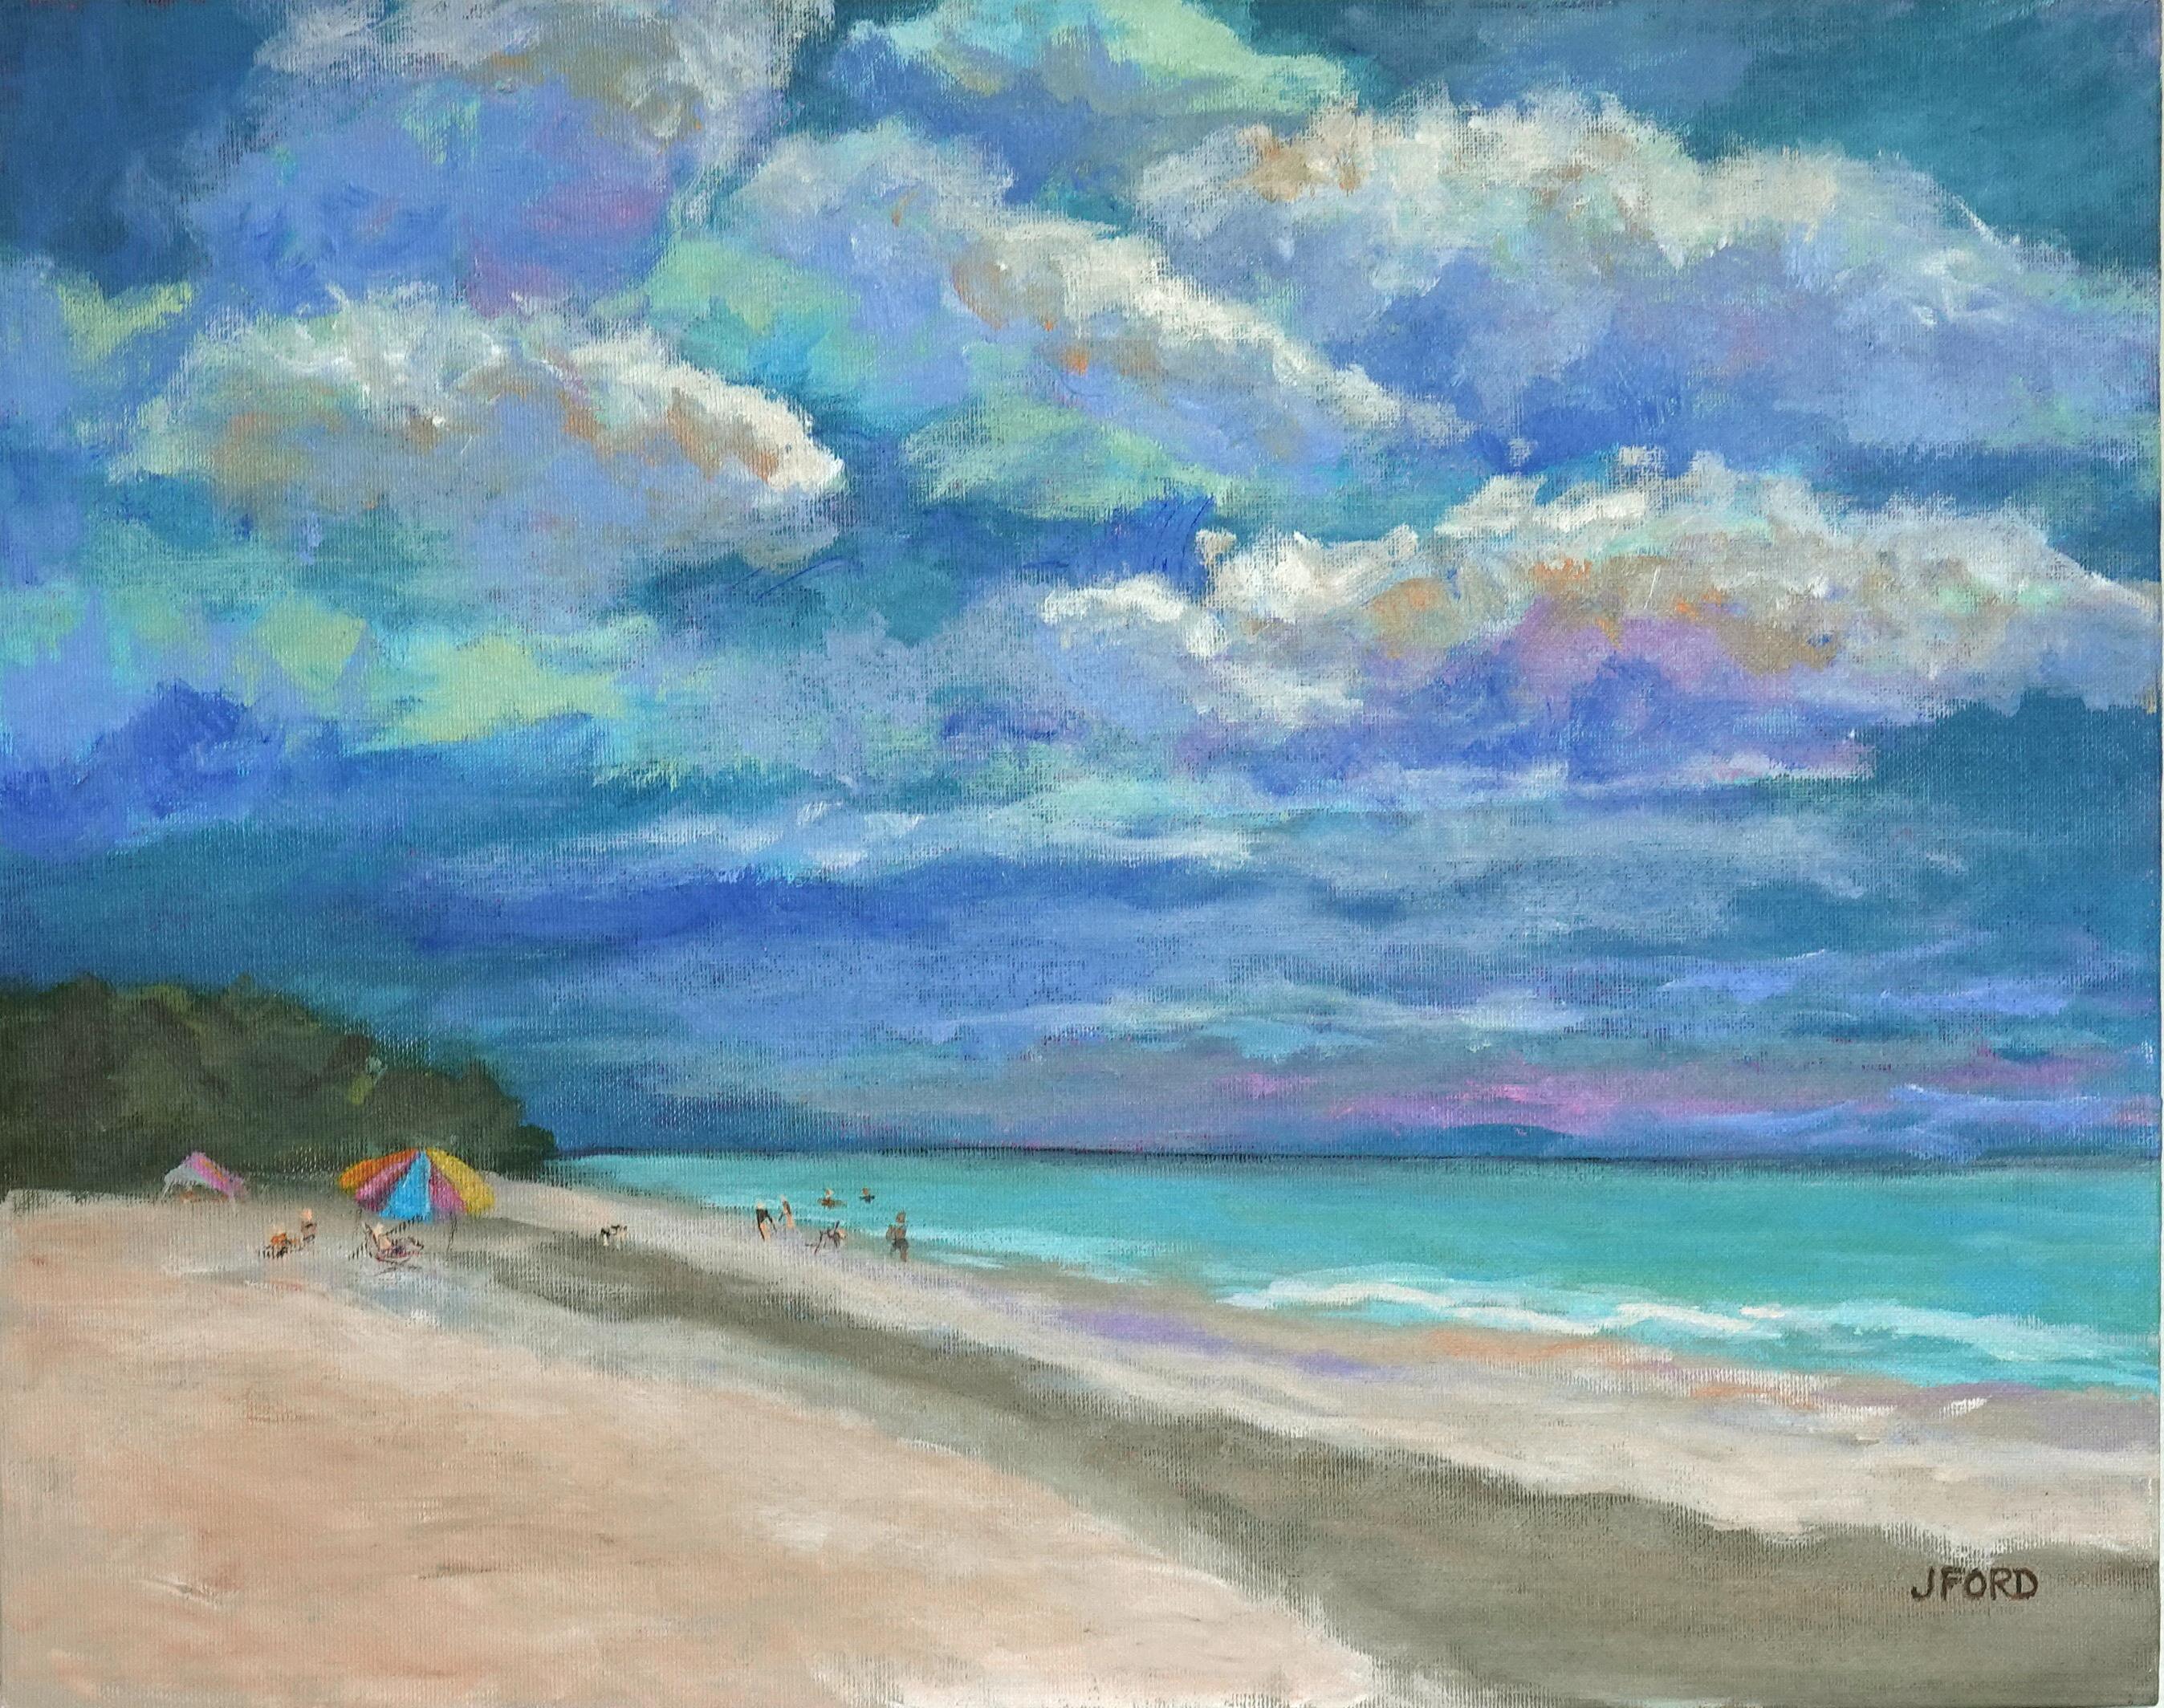 Joanie Ford Landscape Painting - Warm Sand and Beautiful Clouds, Original Painting